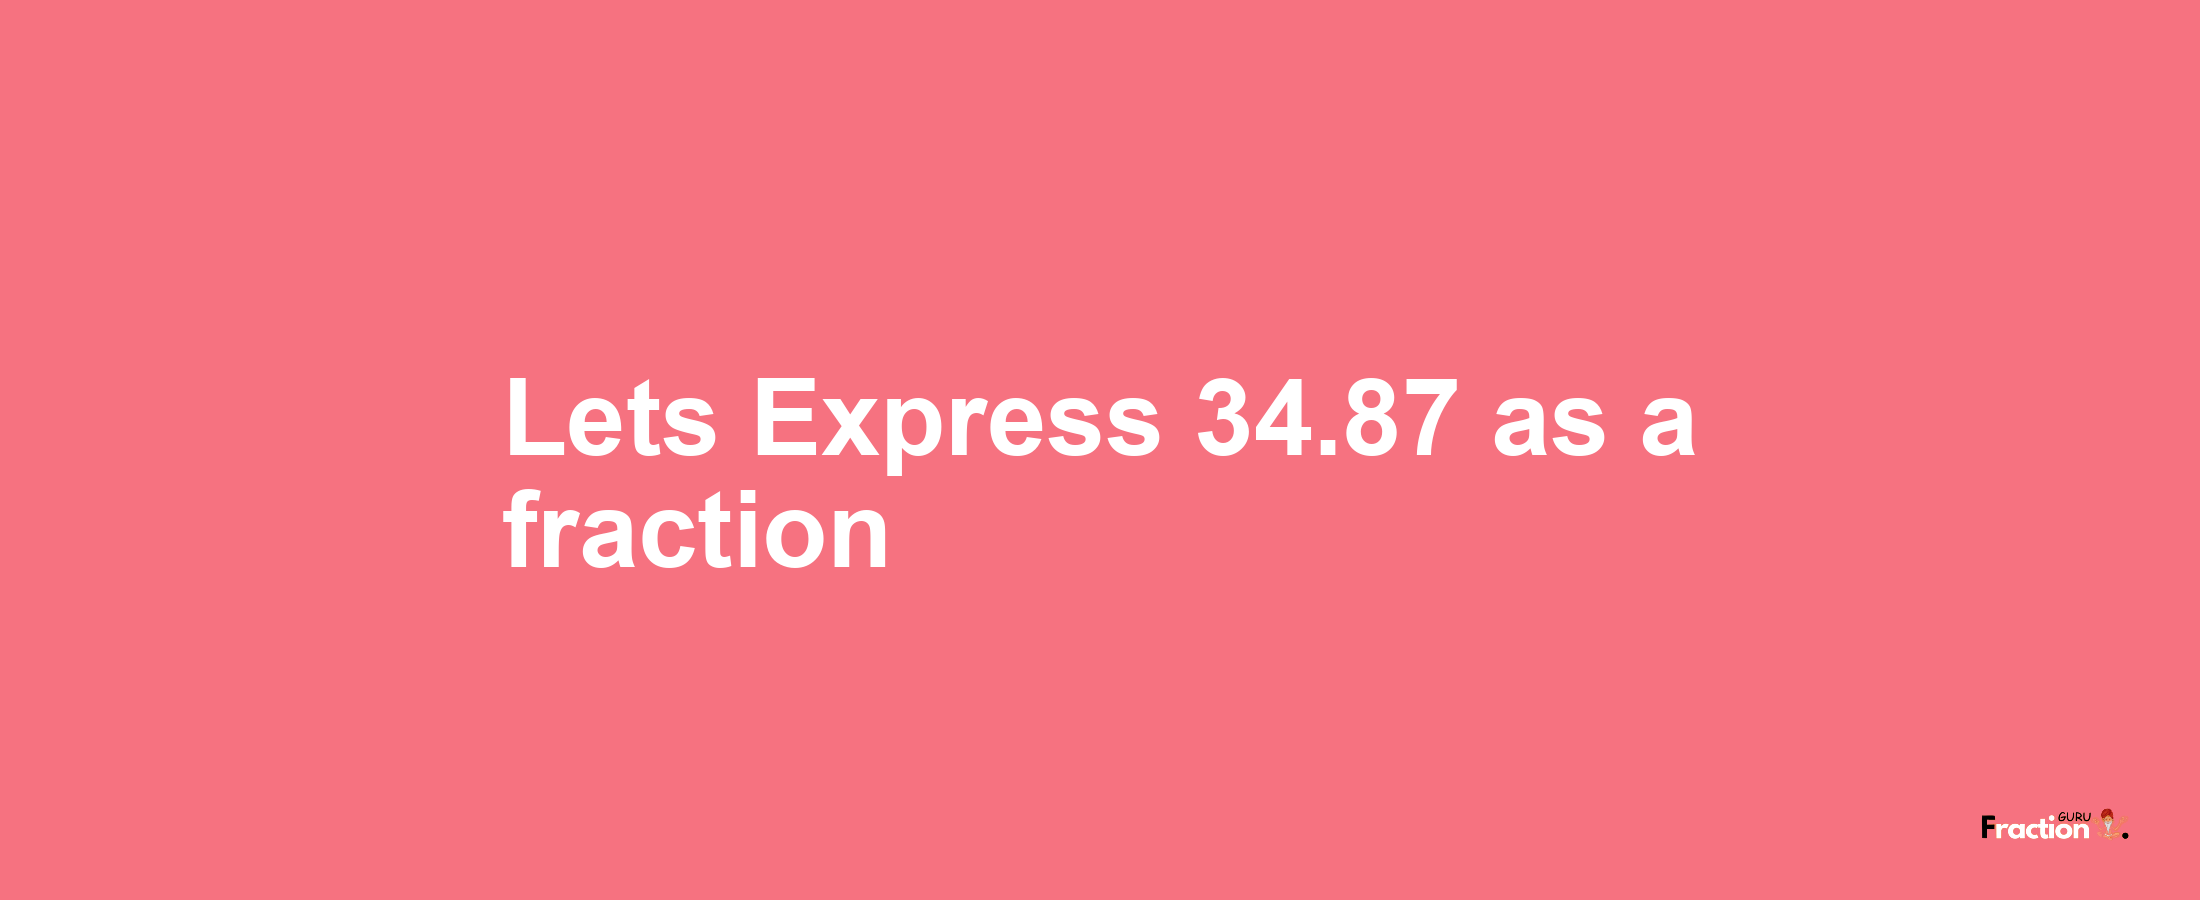 Lets Express 34.87 as afraction